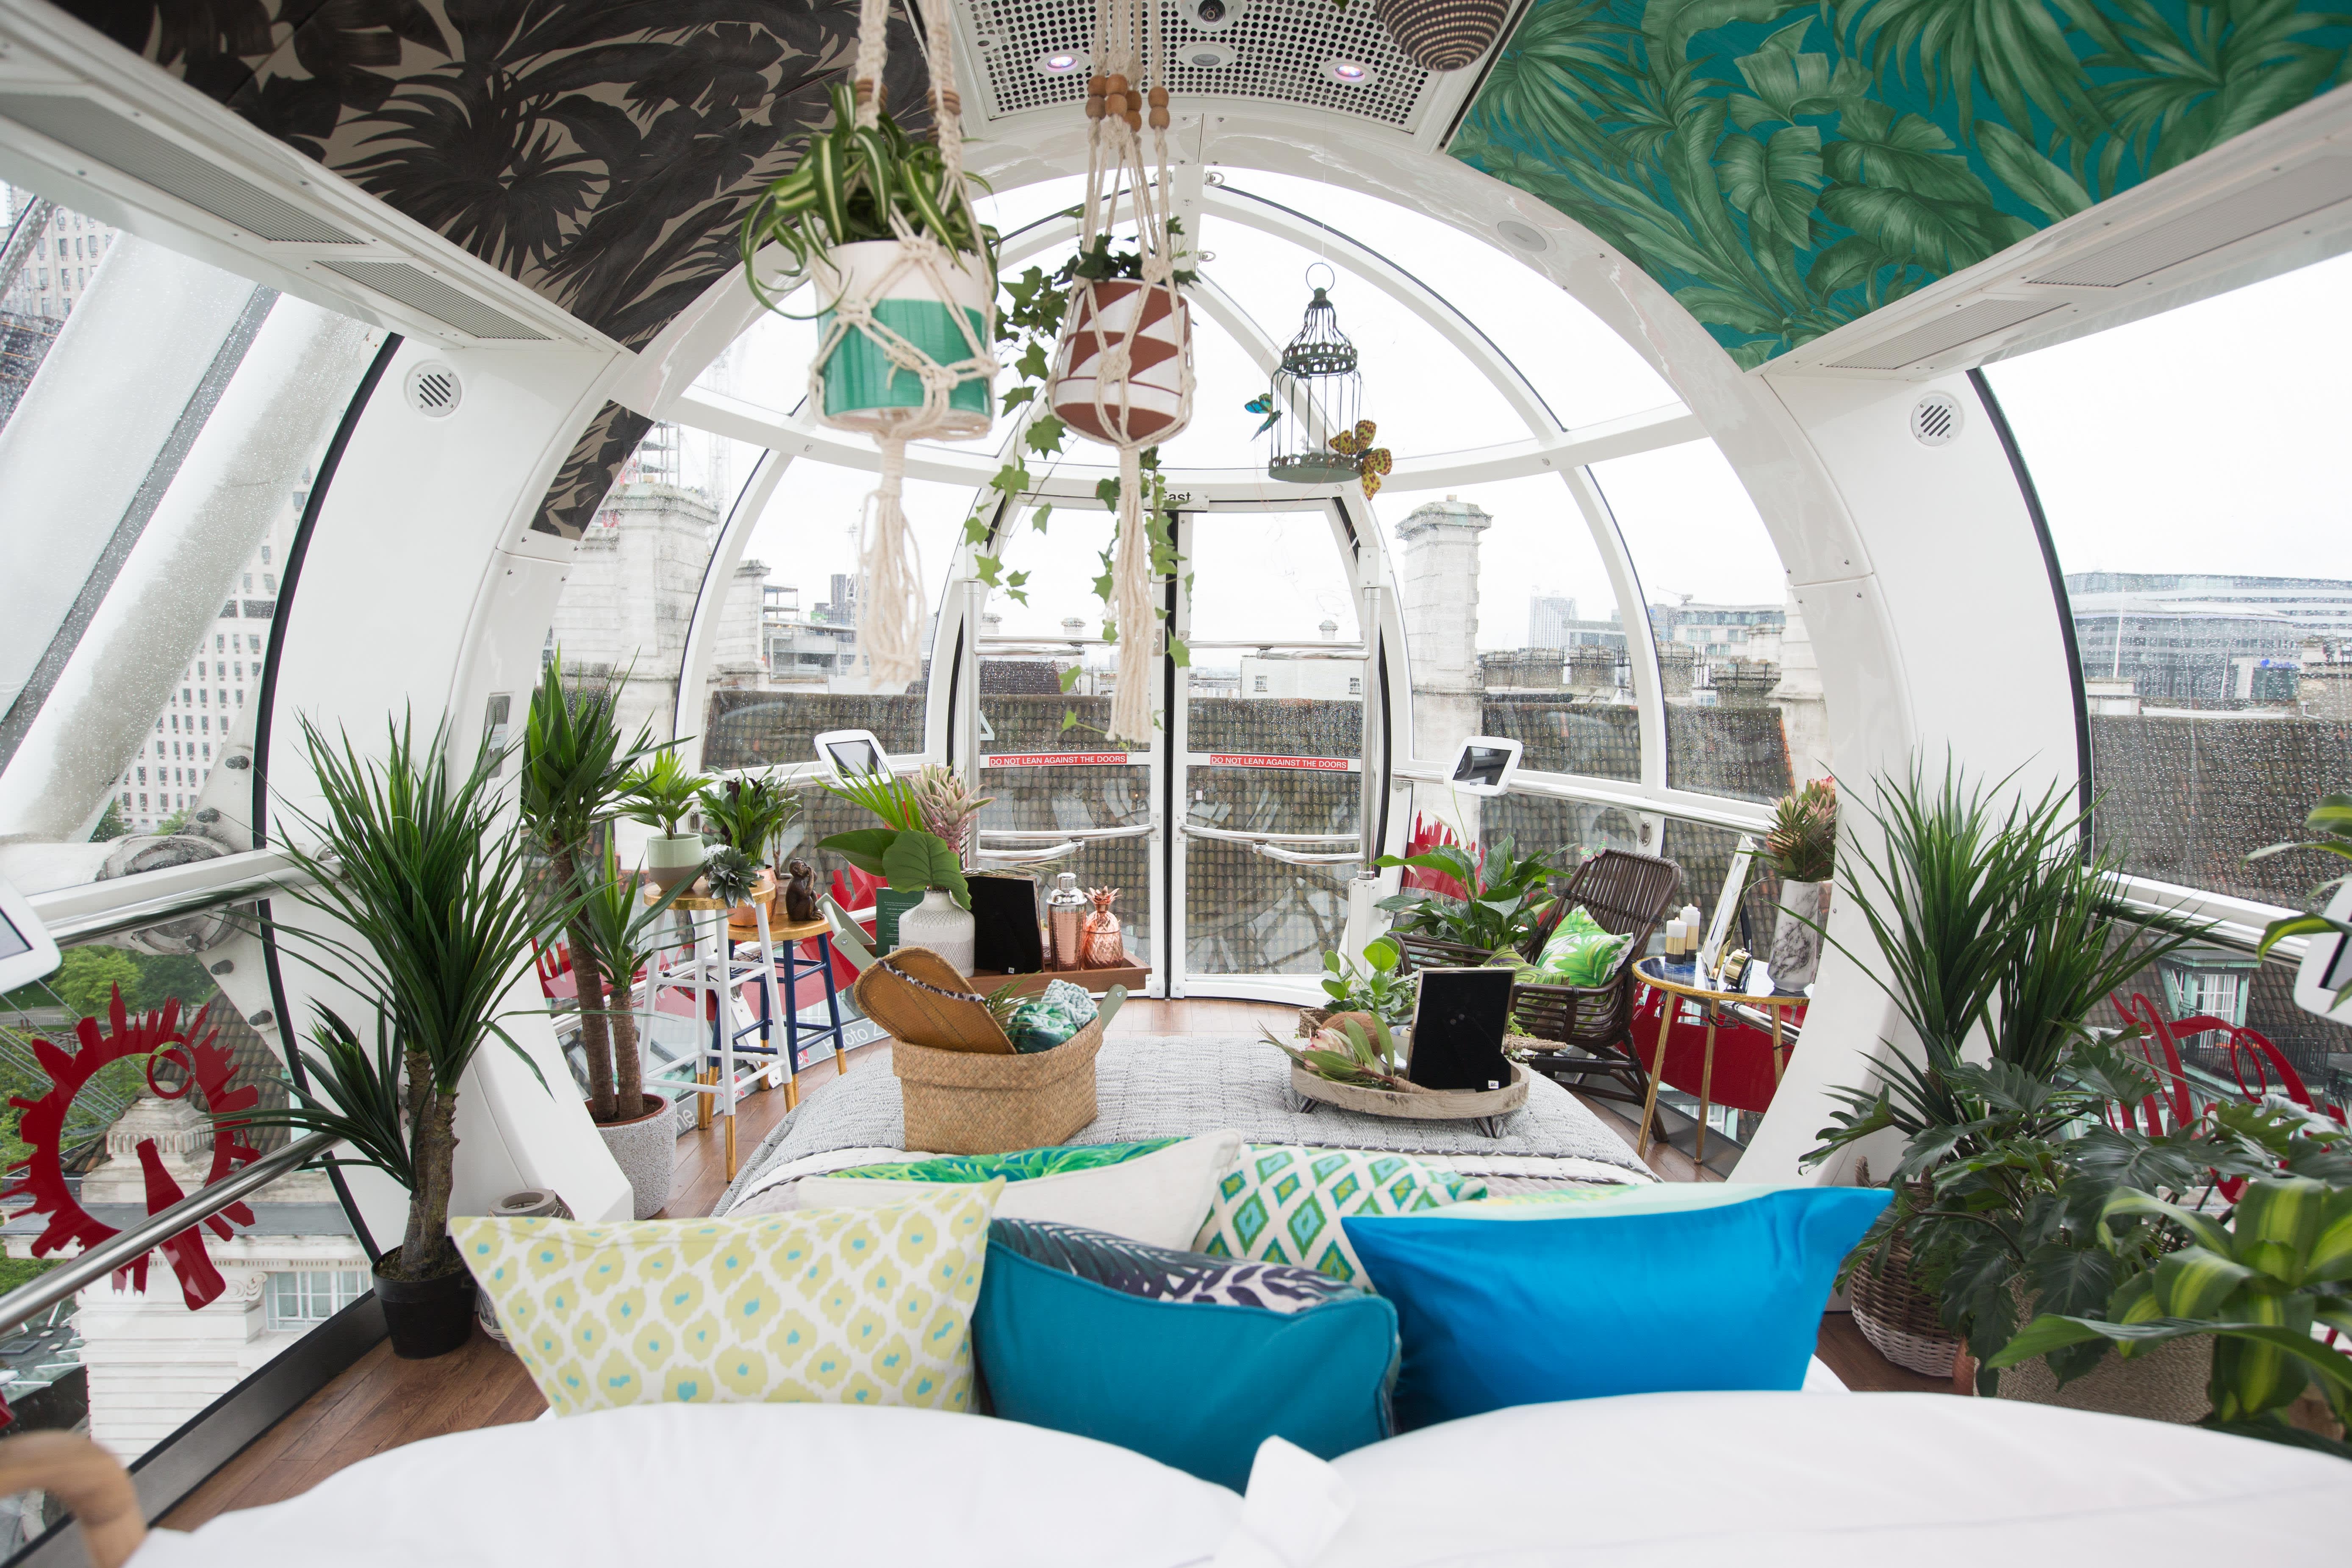 Check Out This Plant Packed Bedroom Inside The London Eye